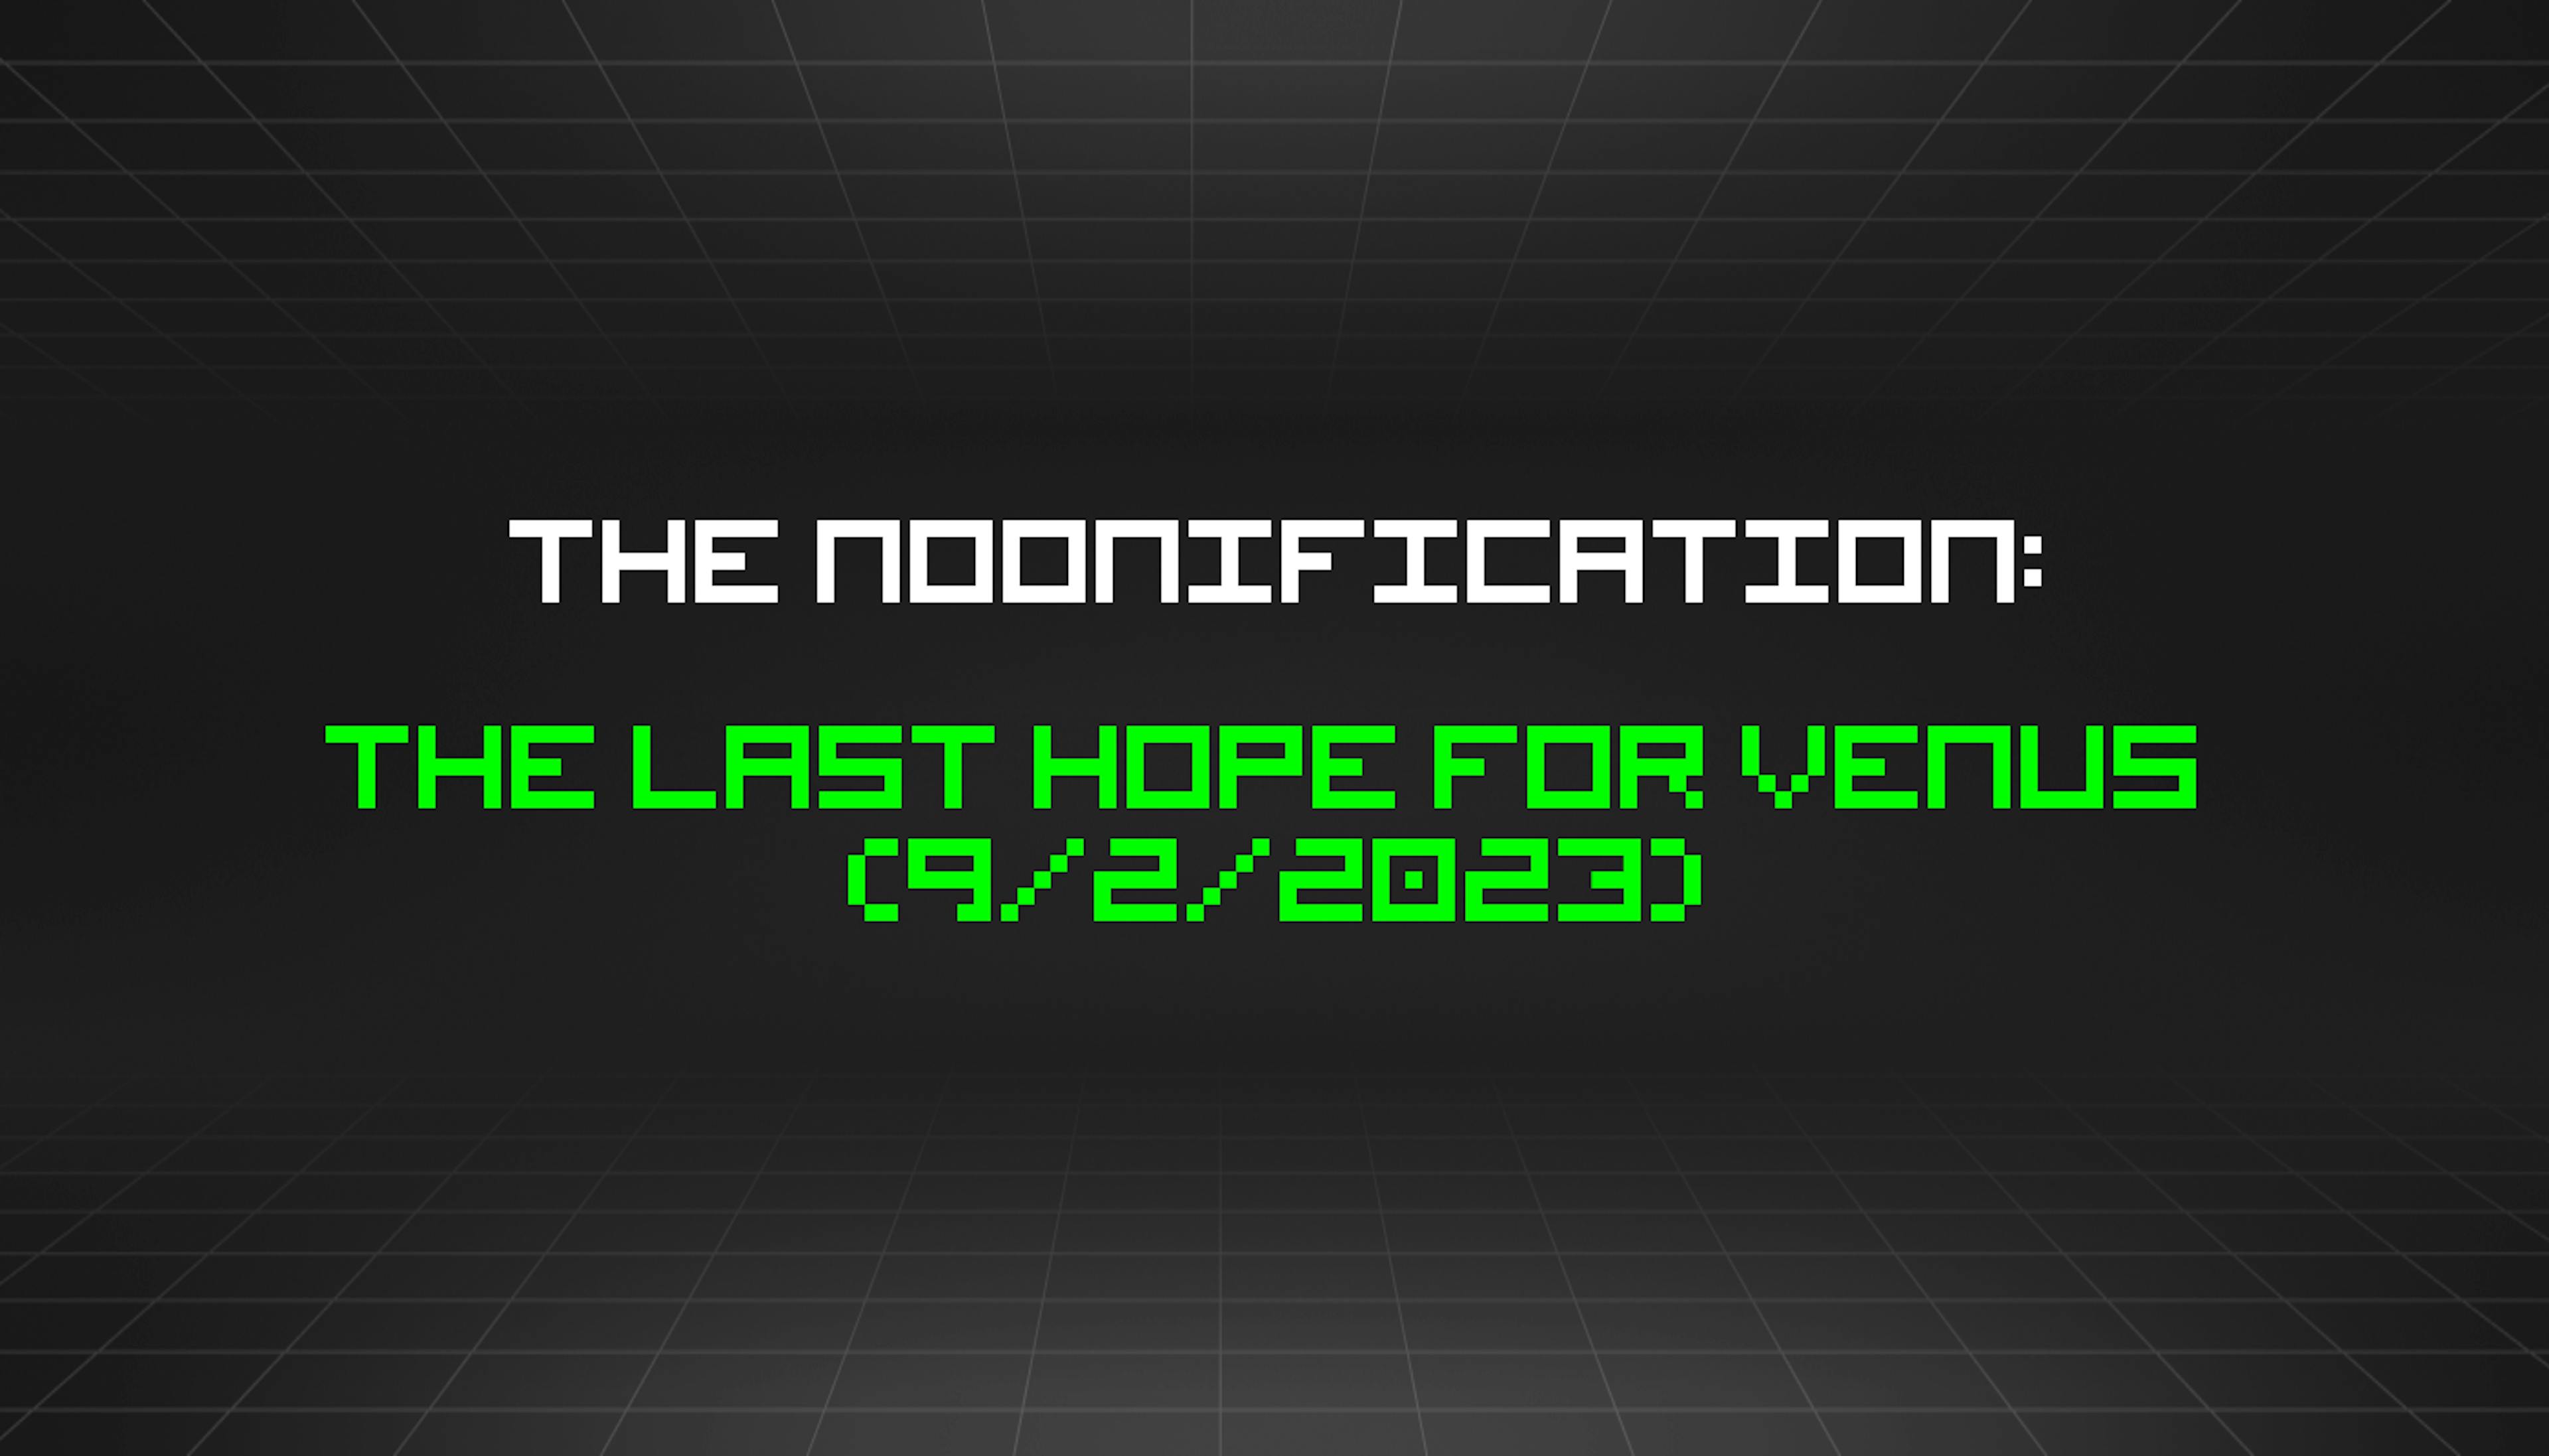 featured image - The Noonification: The Last Hope for Venus  (9/2/2023)